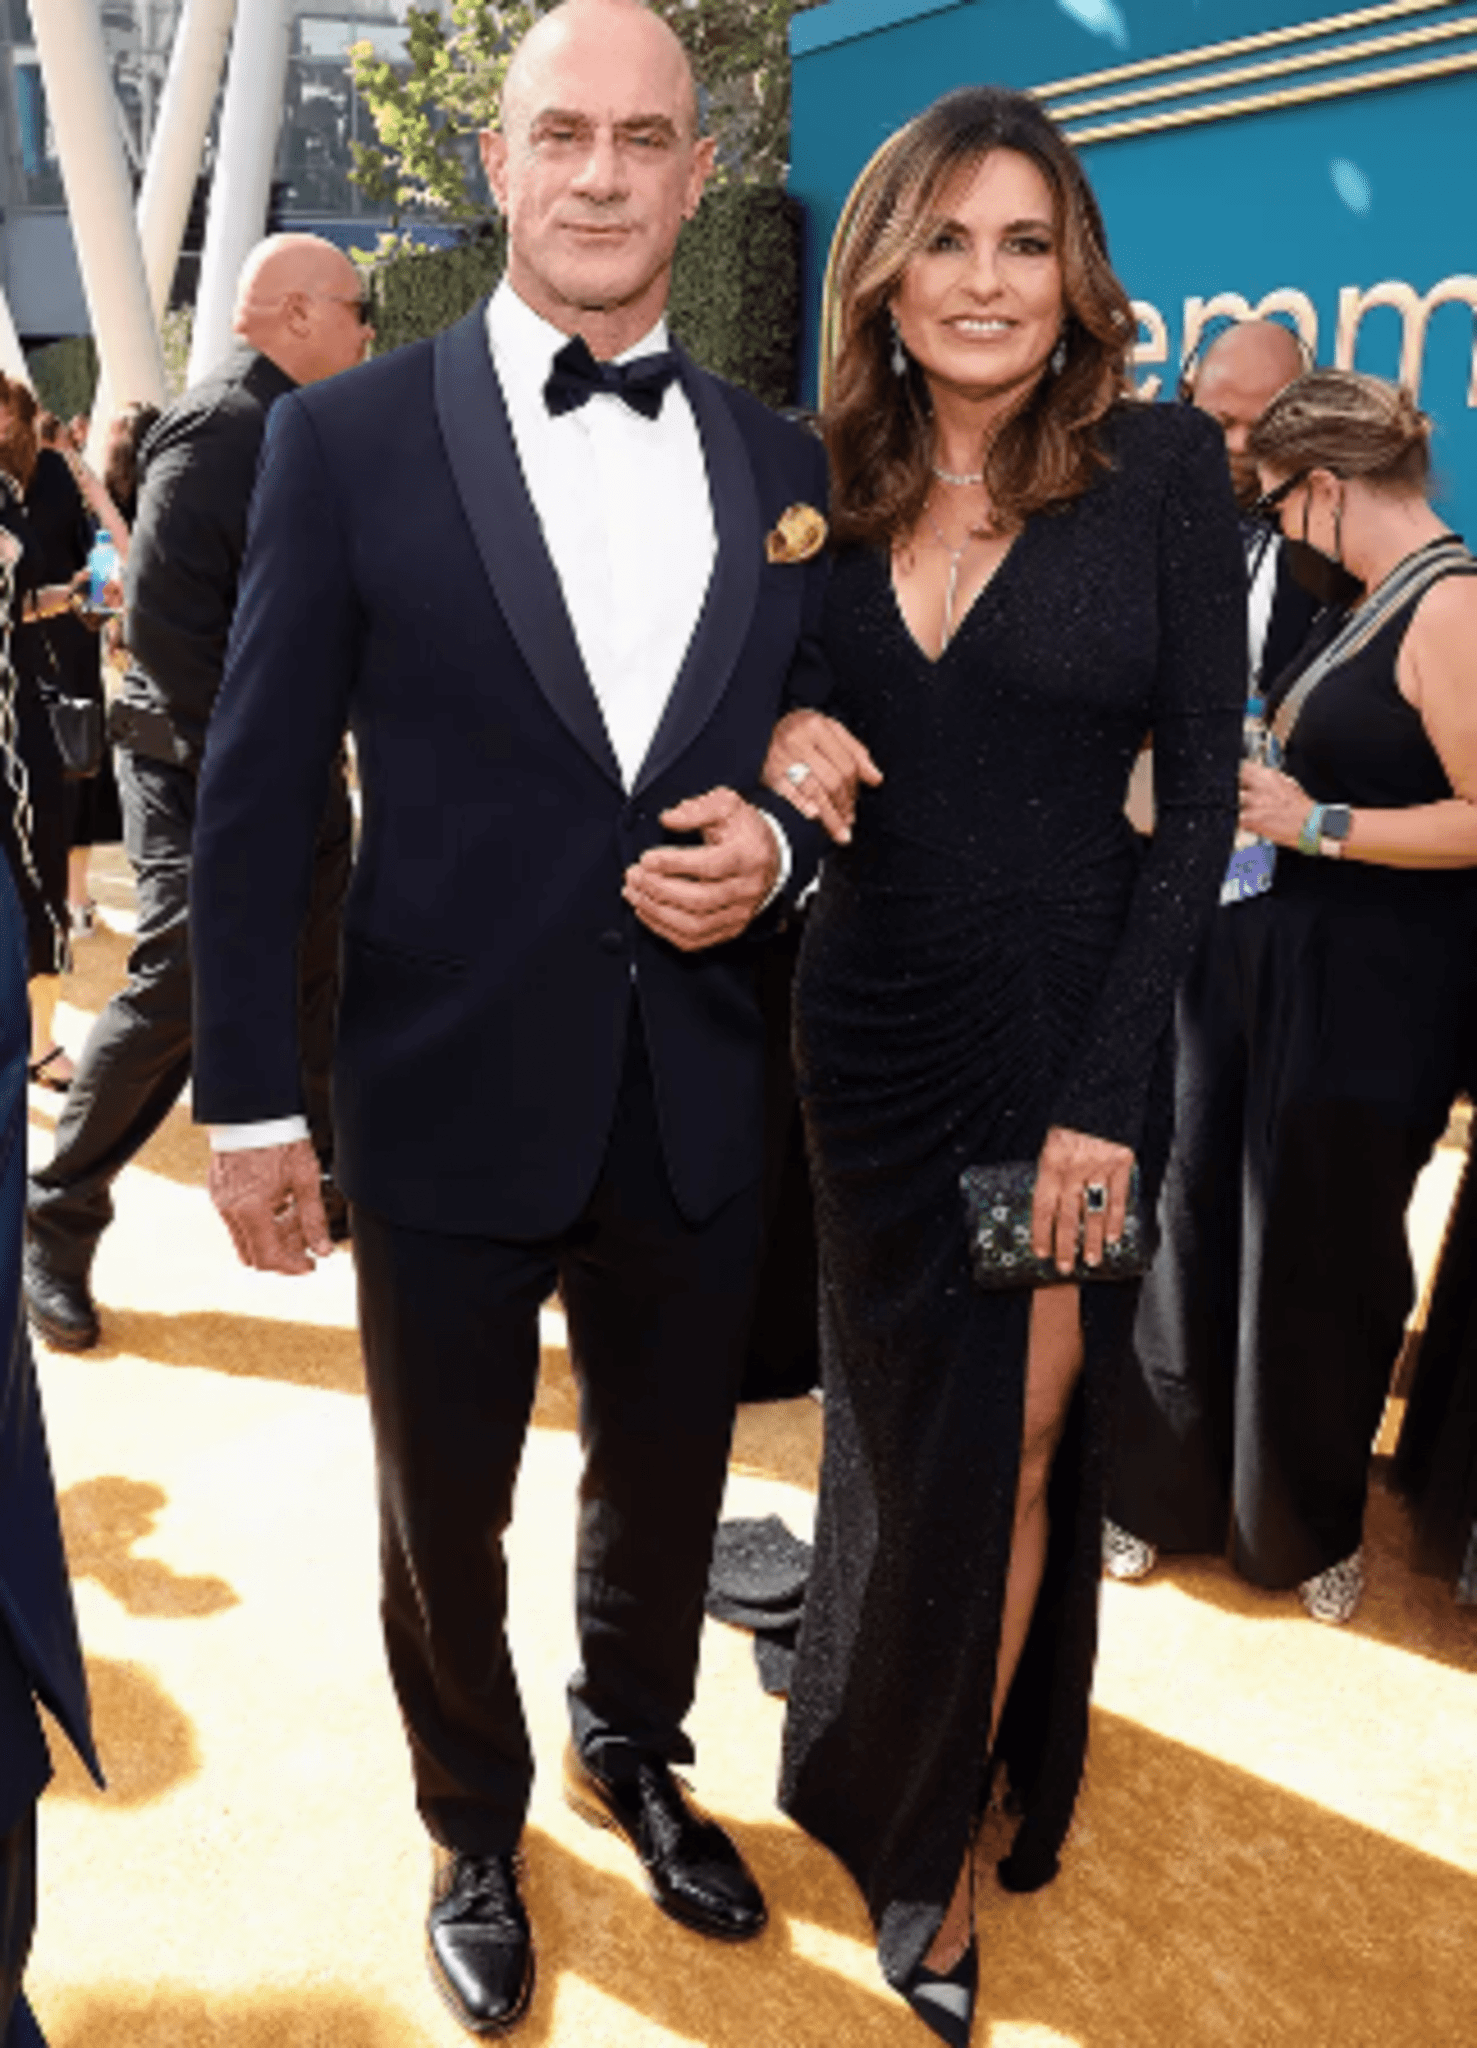 Mariska Hargitay has stated that she is comfortable with the label of "Christopher Meloni's second wife."